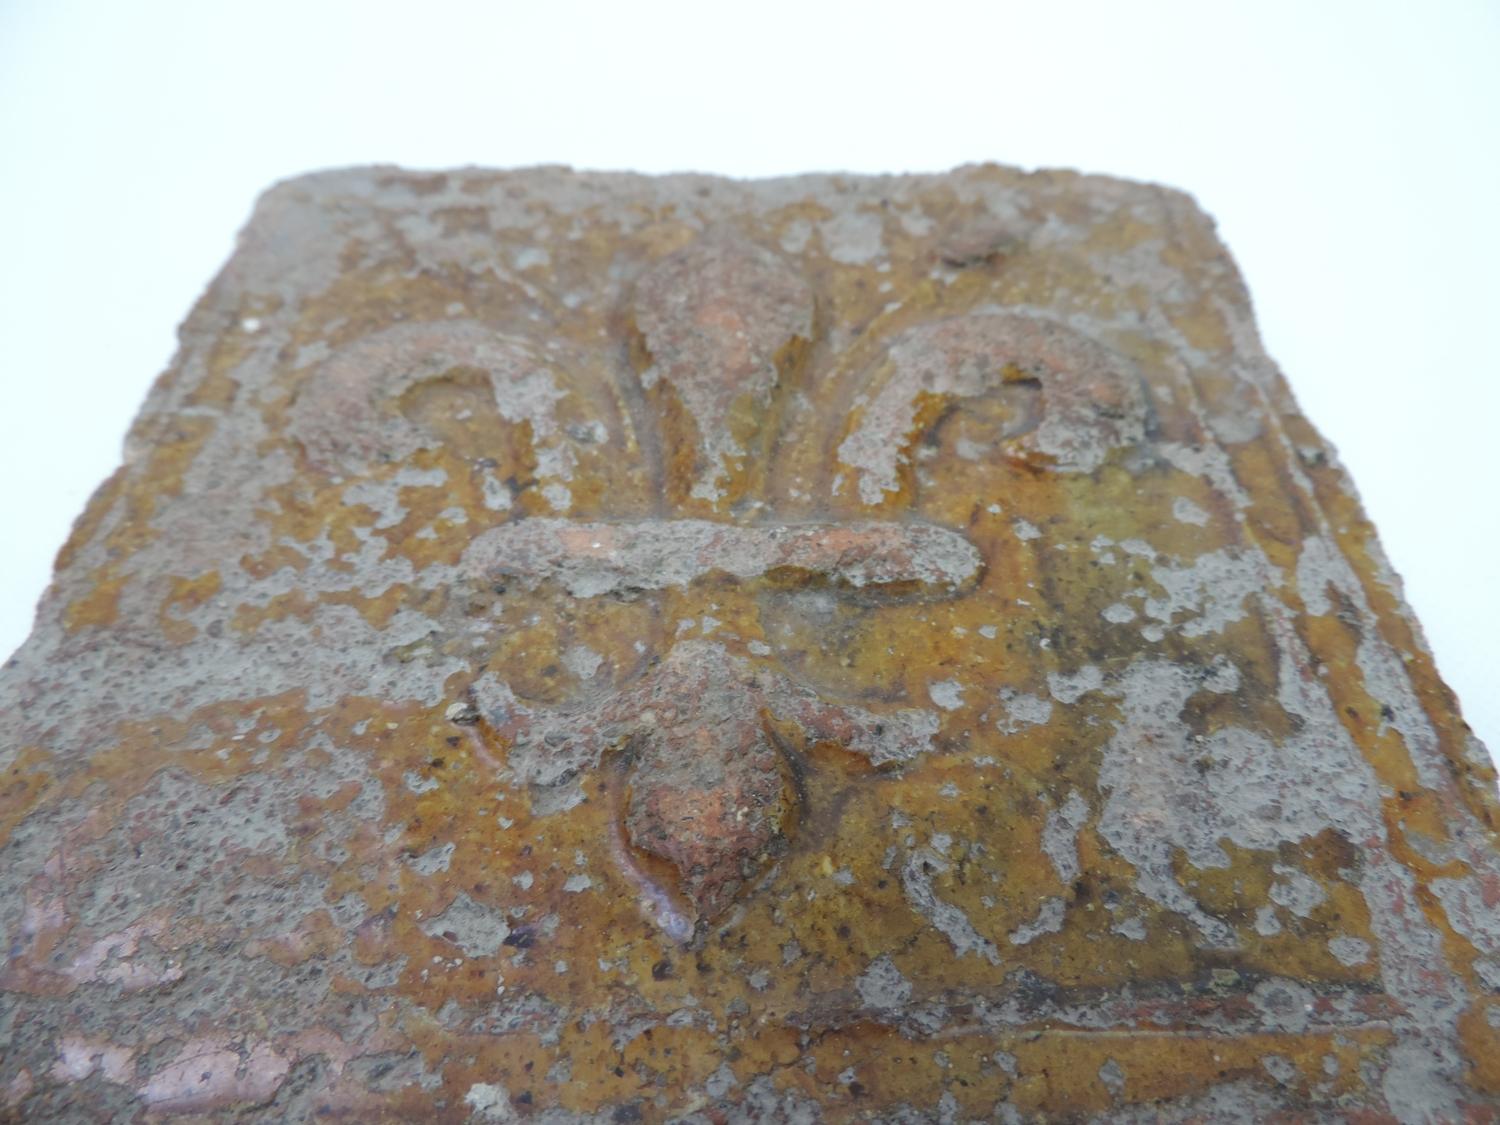 North Devon (Barnstaple) 17th Century Slipware Tile Dated 1708 with the Initials of the Maker NL - Image 2 of 3